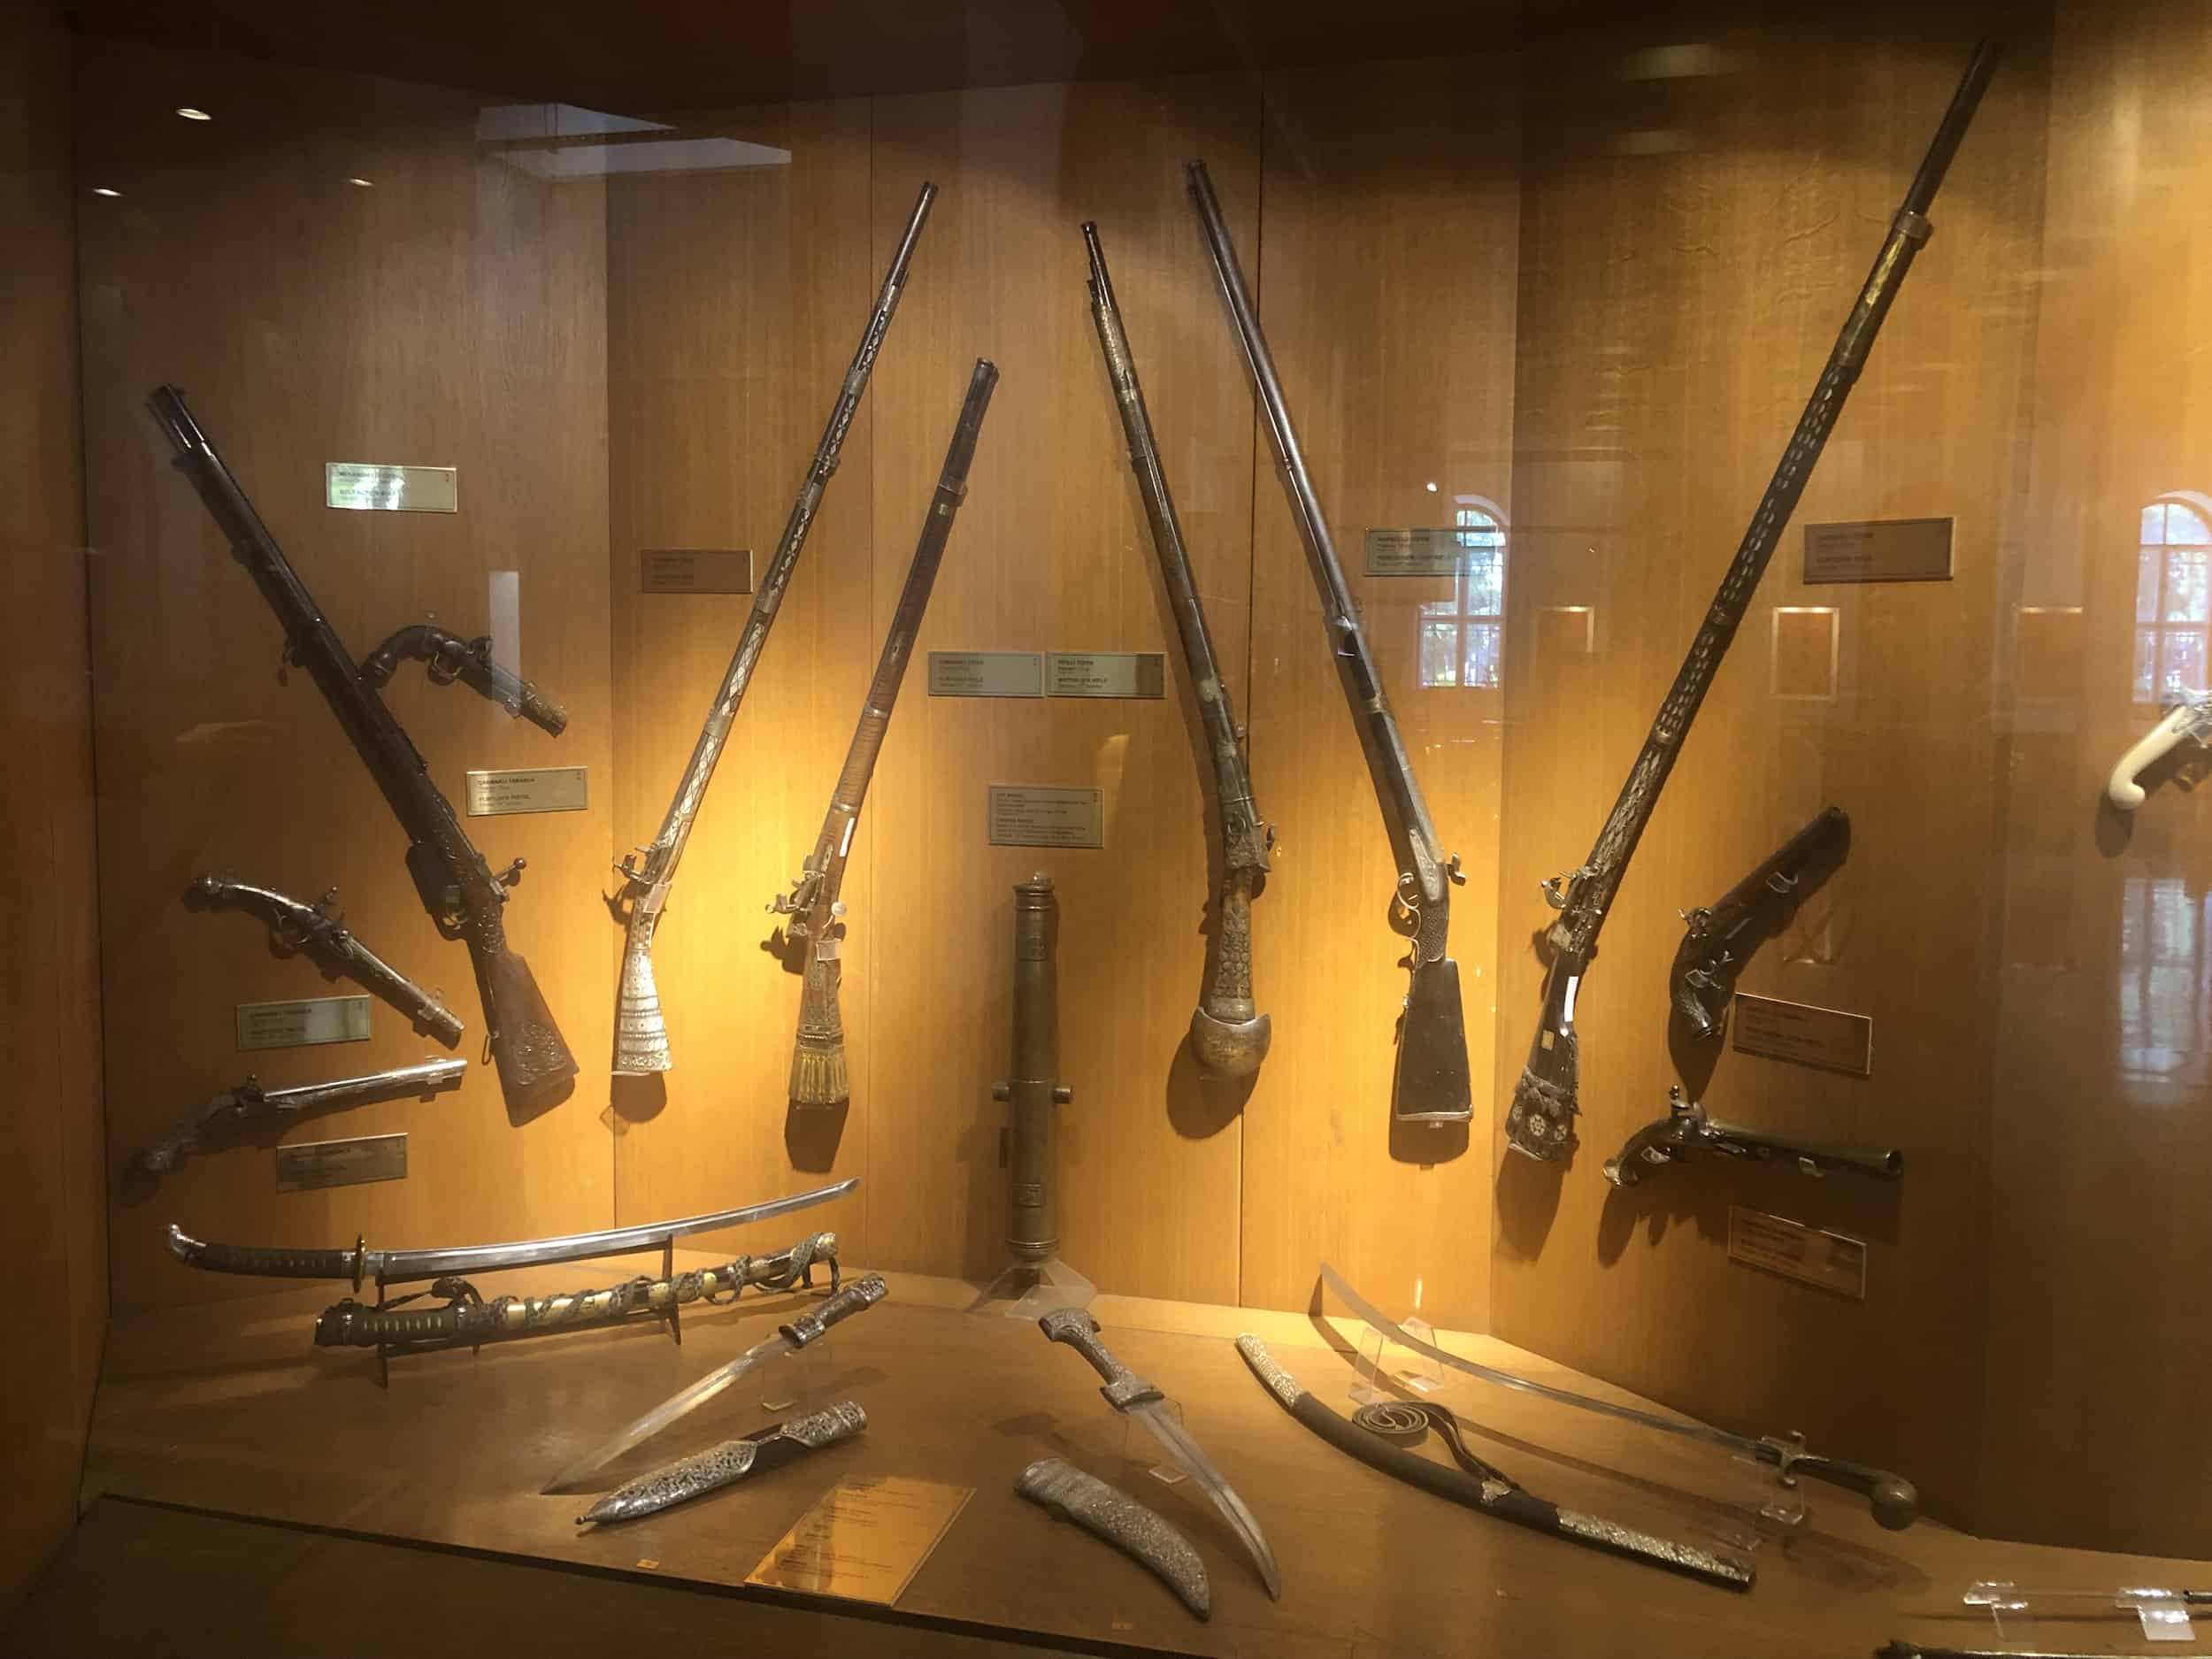 Ottoman guns and swords at the Harbiye Military Museum in Istanbul, Turkey